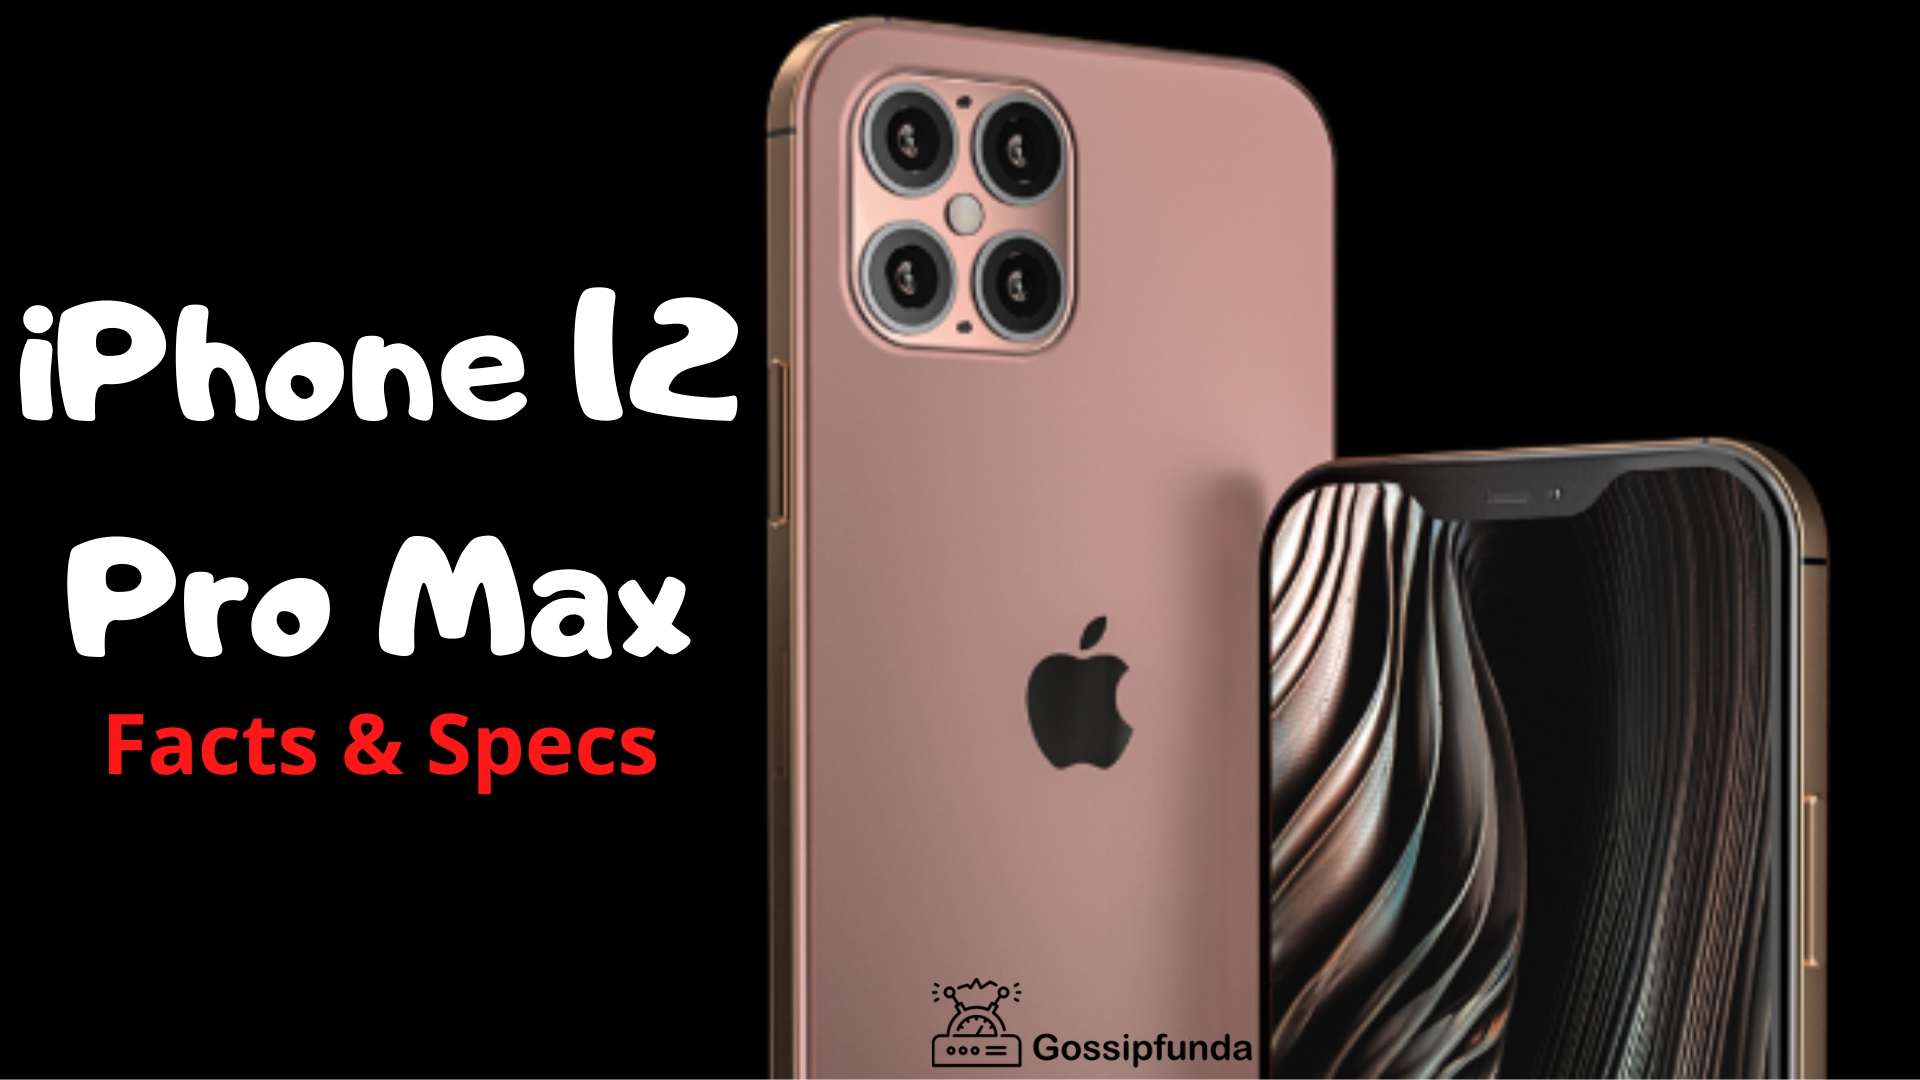 iPhone 12 Pro Max - See the latest features with Gossipfunda